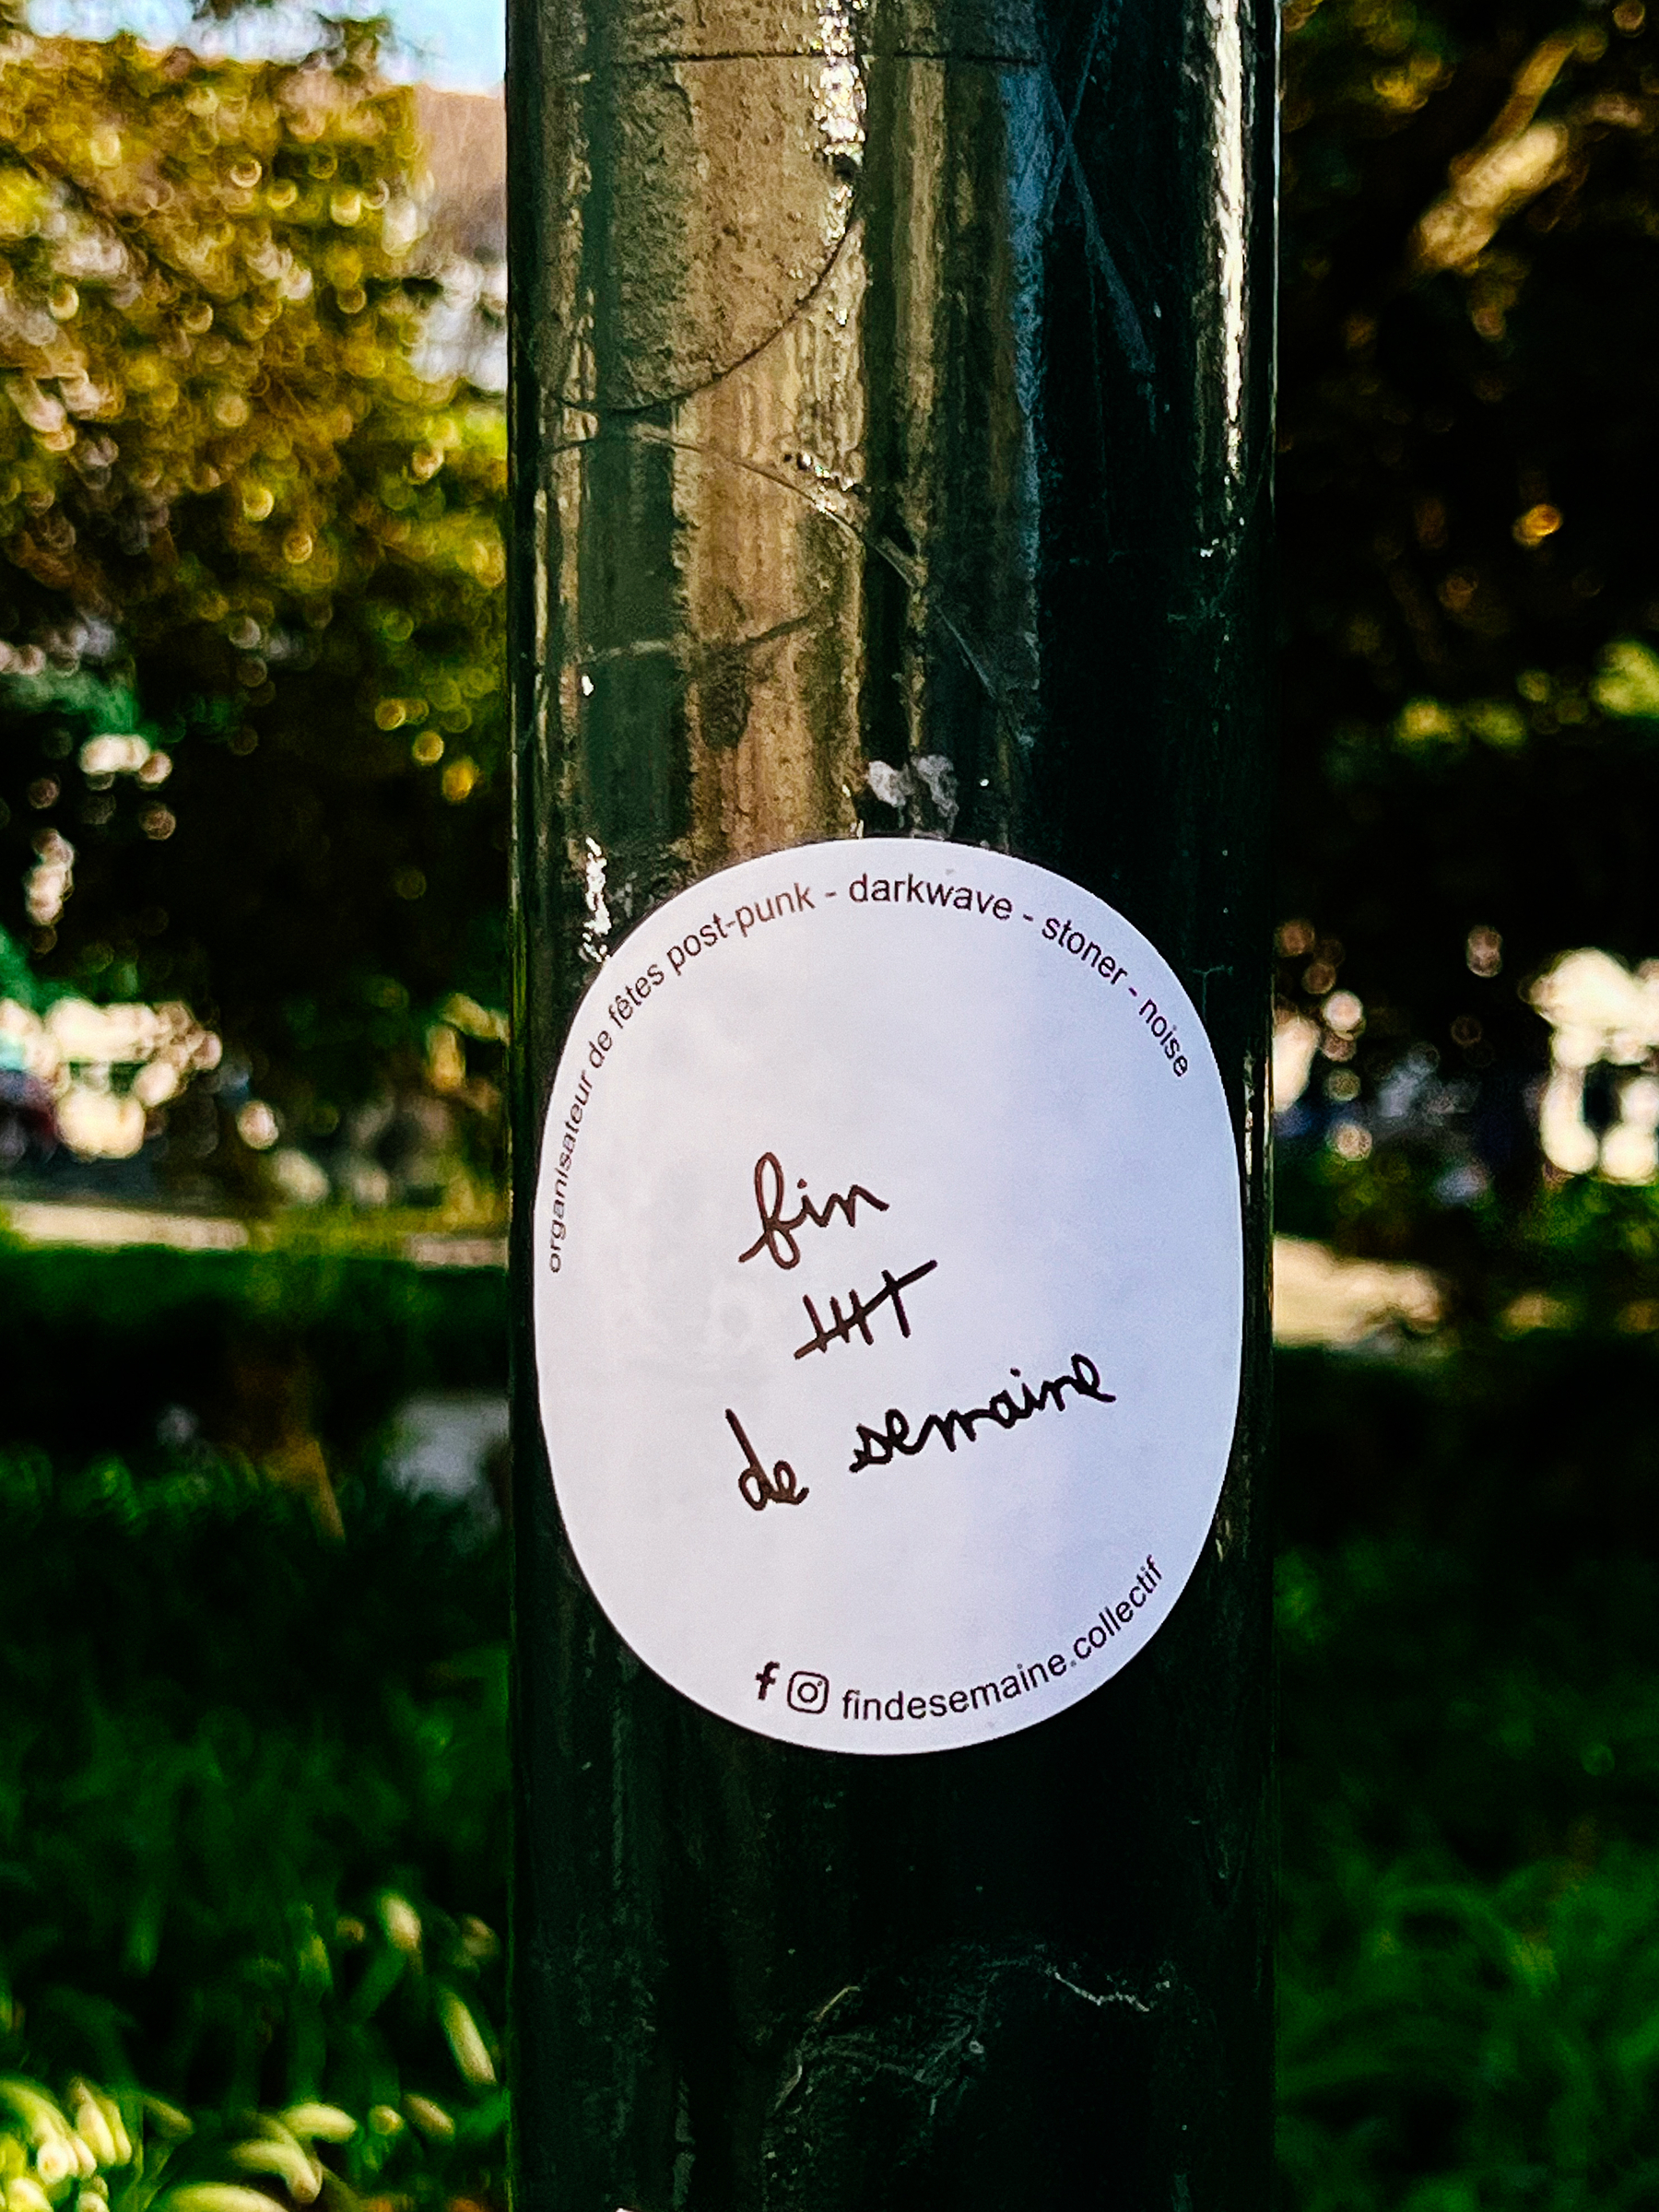 A sticker on a pole, with handwritten text &ldquo;fin de semaine&rdquo;. Backdrop of blurred greenery.